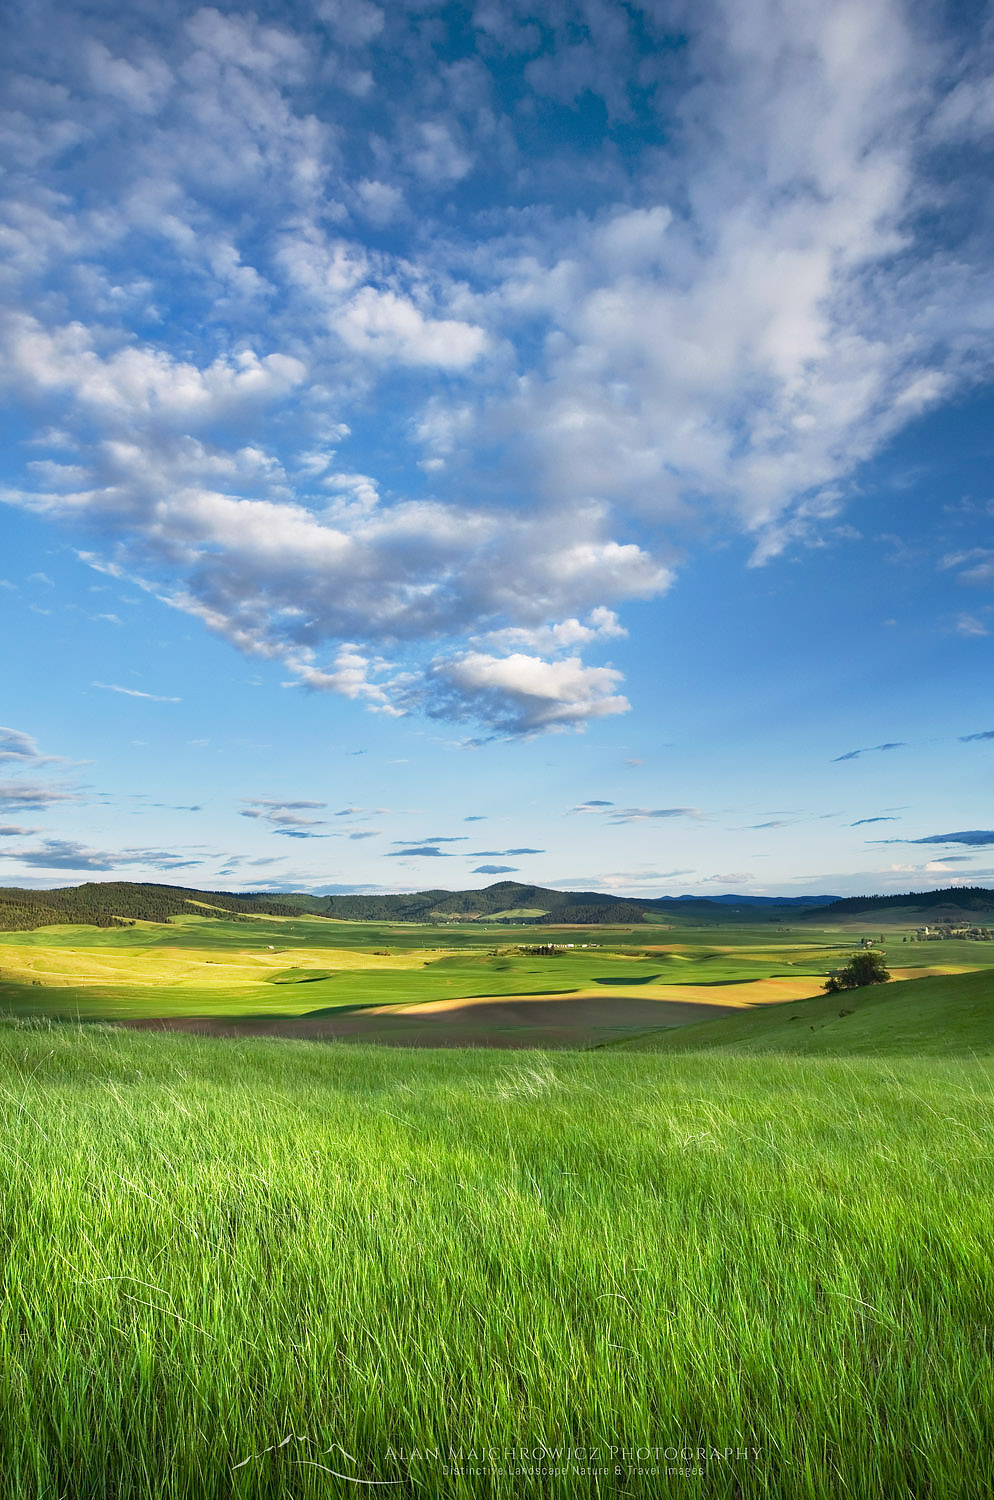 Clearing storm clouds in evening over a grassy meadow in the Palouse region of the Inland Empire of Washington #51742